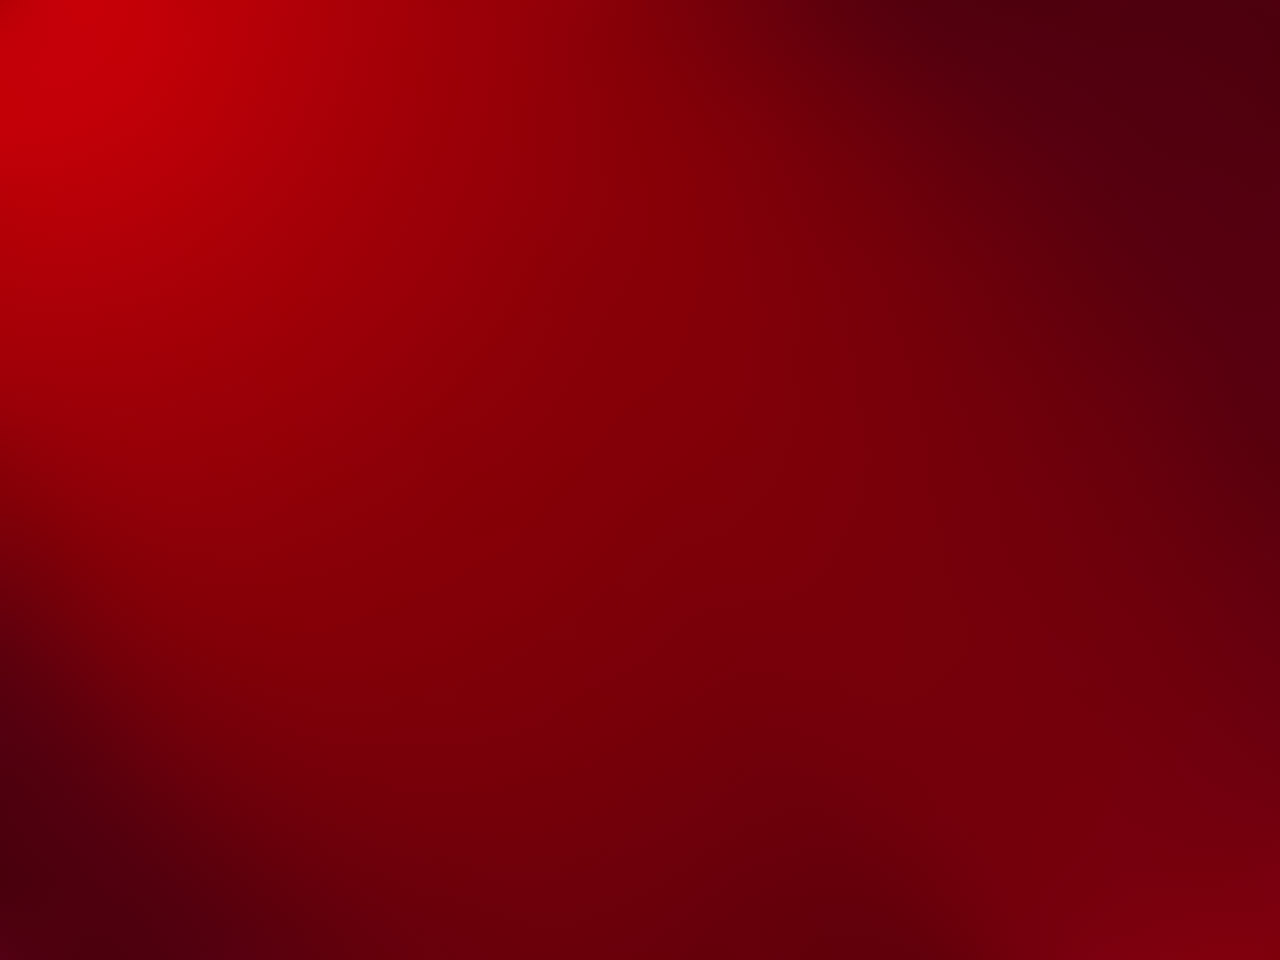 abstract_background_red.jpg - 19.92 kB